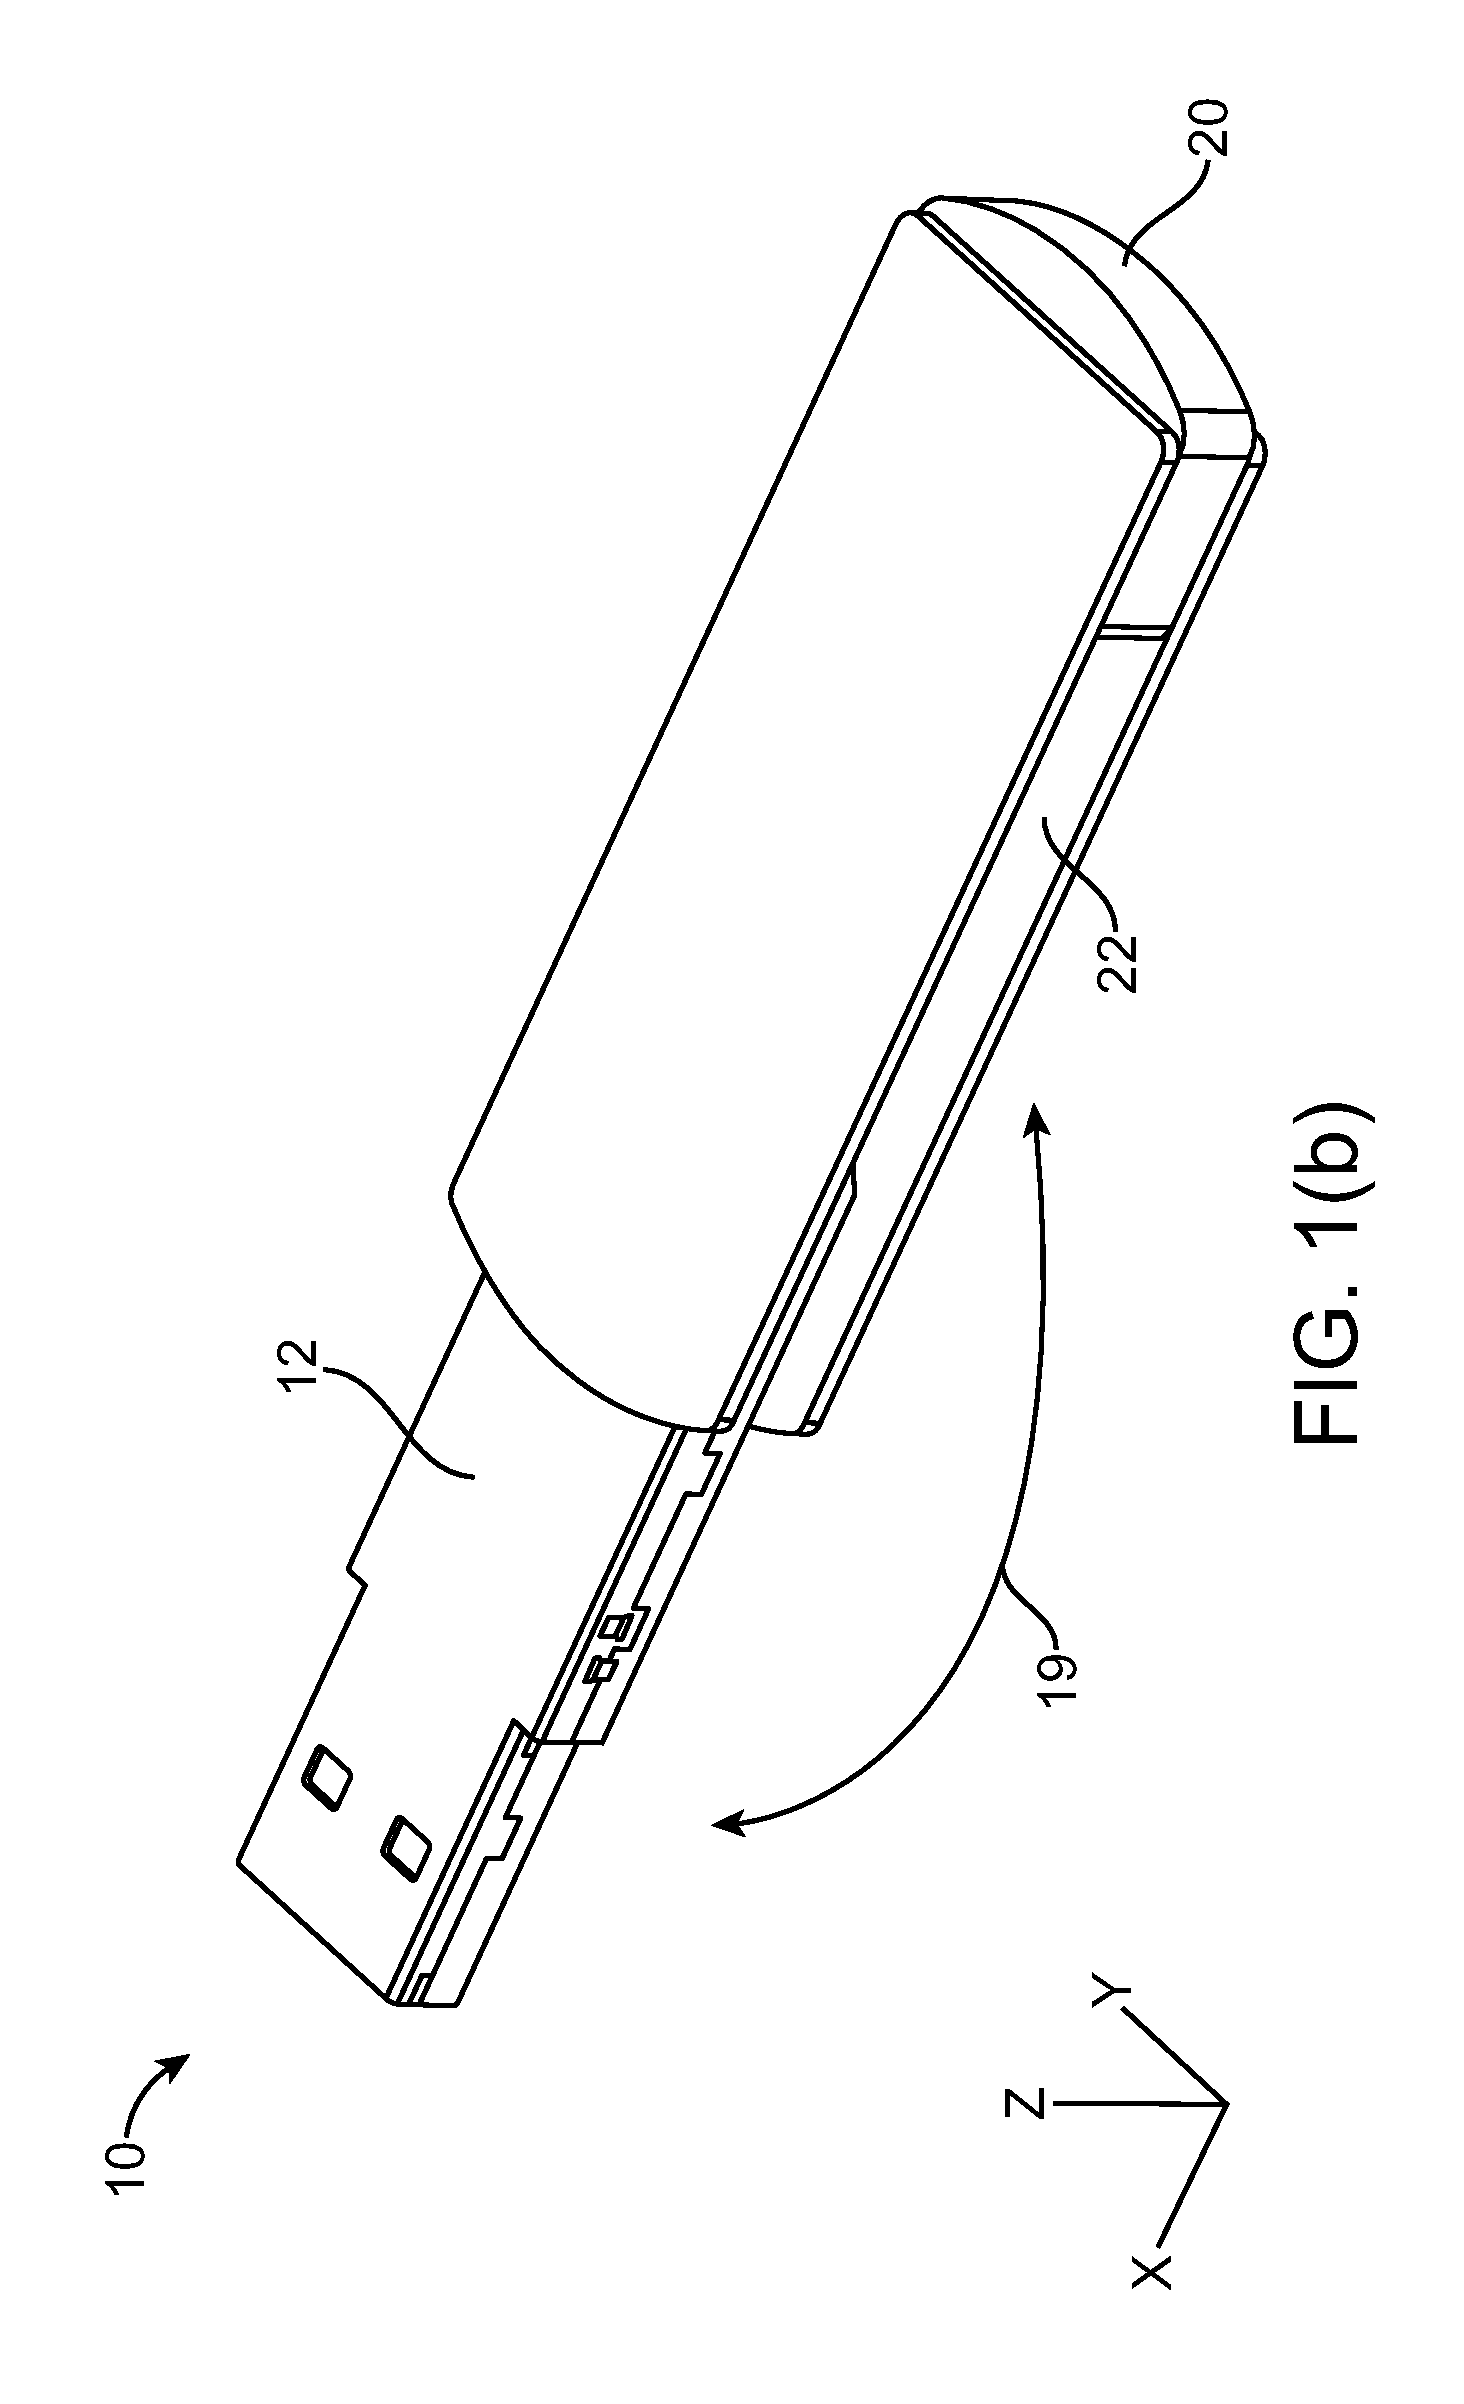 Universal serial bus (USB) flash drive housing a slim USB device and having swivel cap functionalities allowing for two locking positions